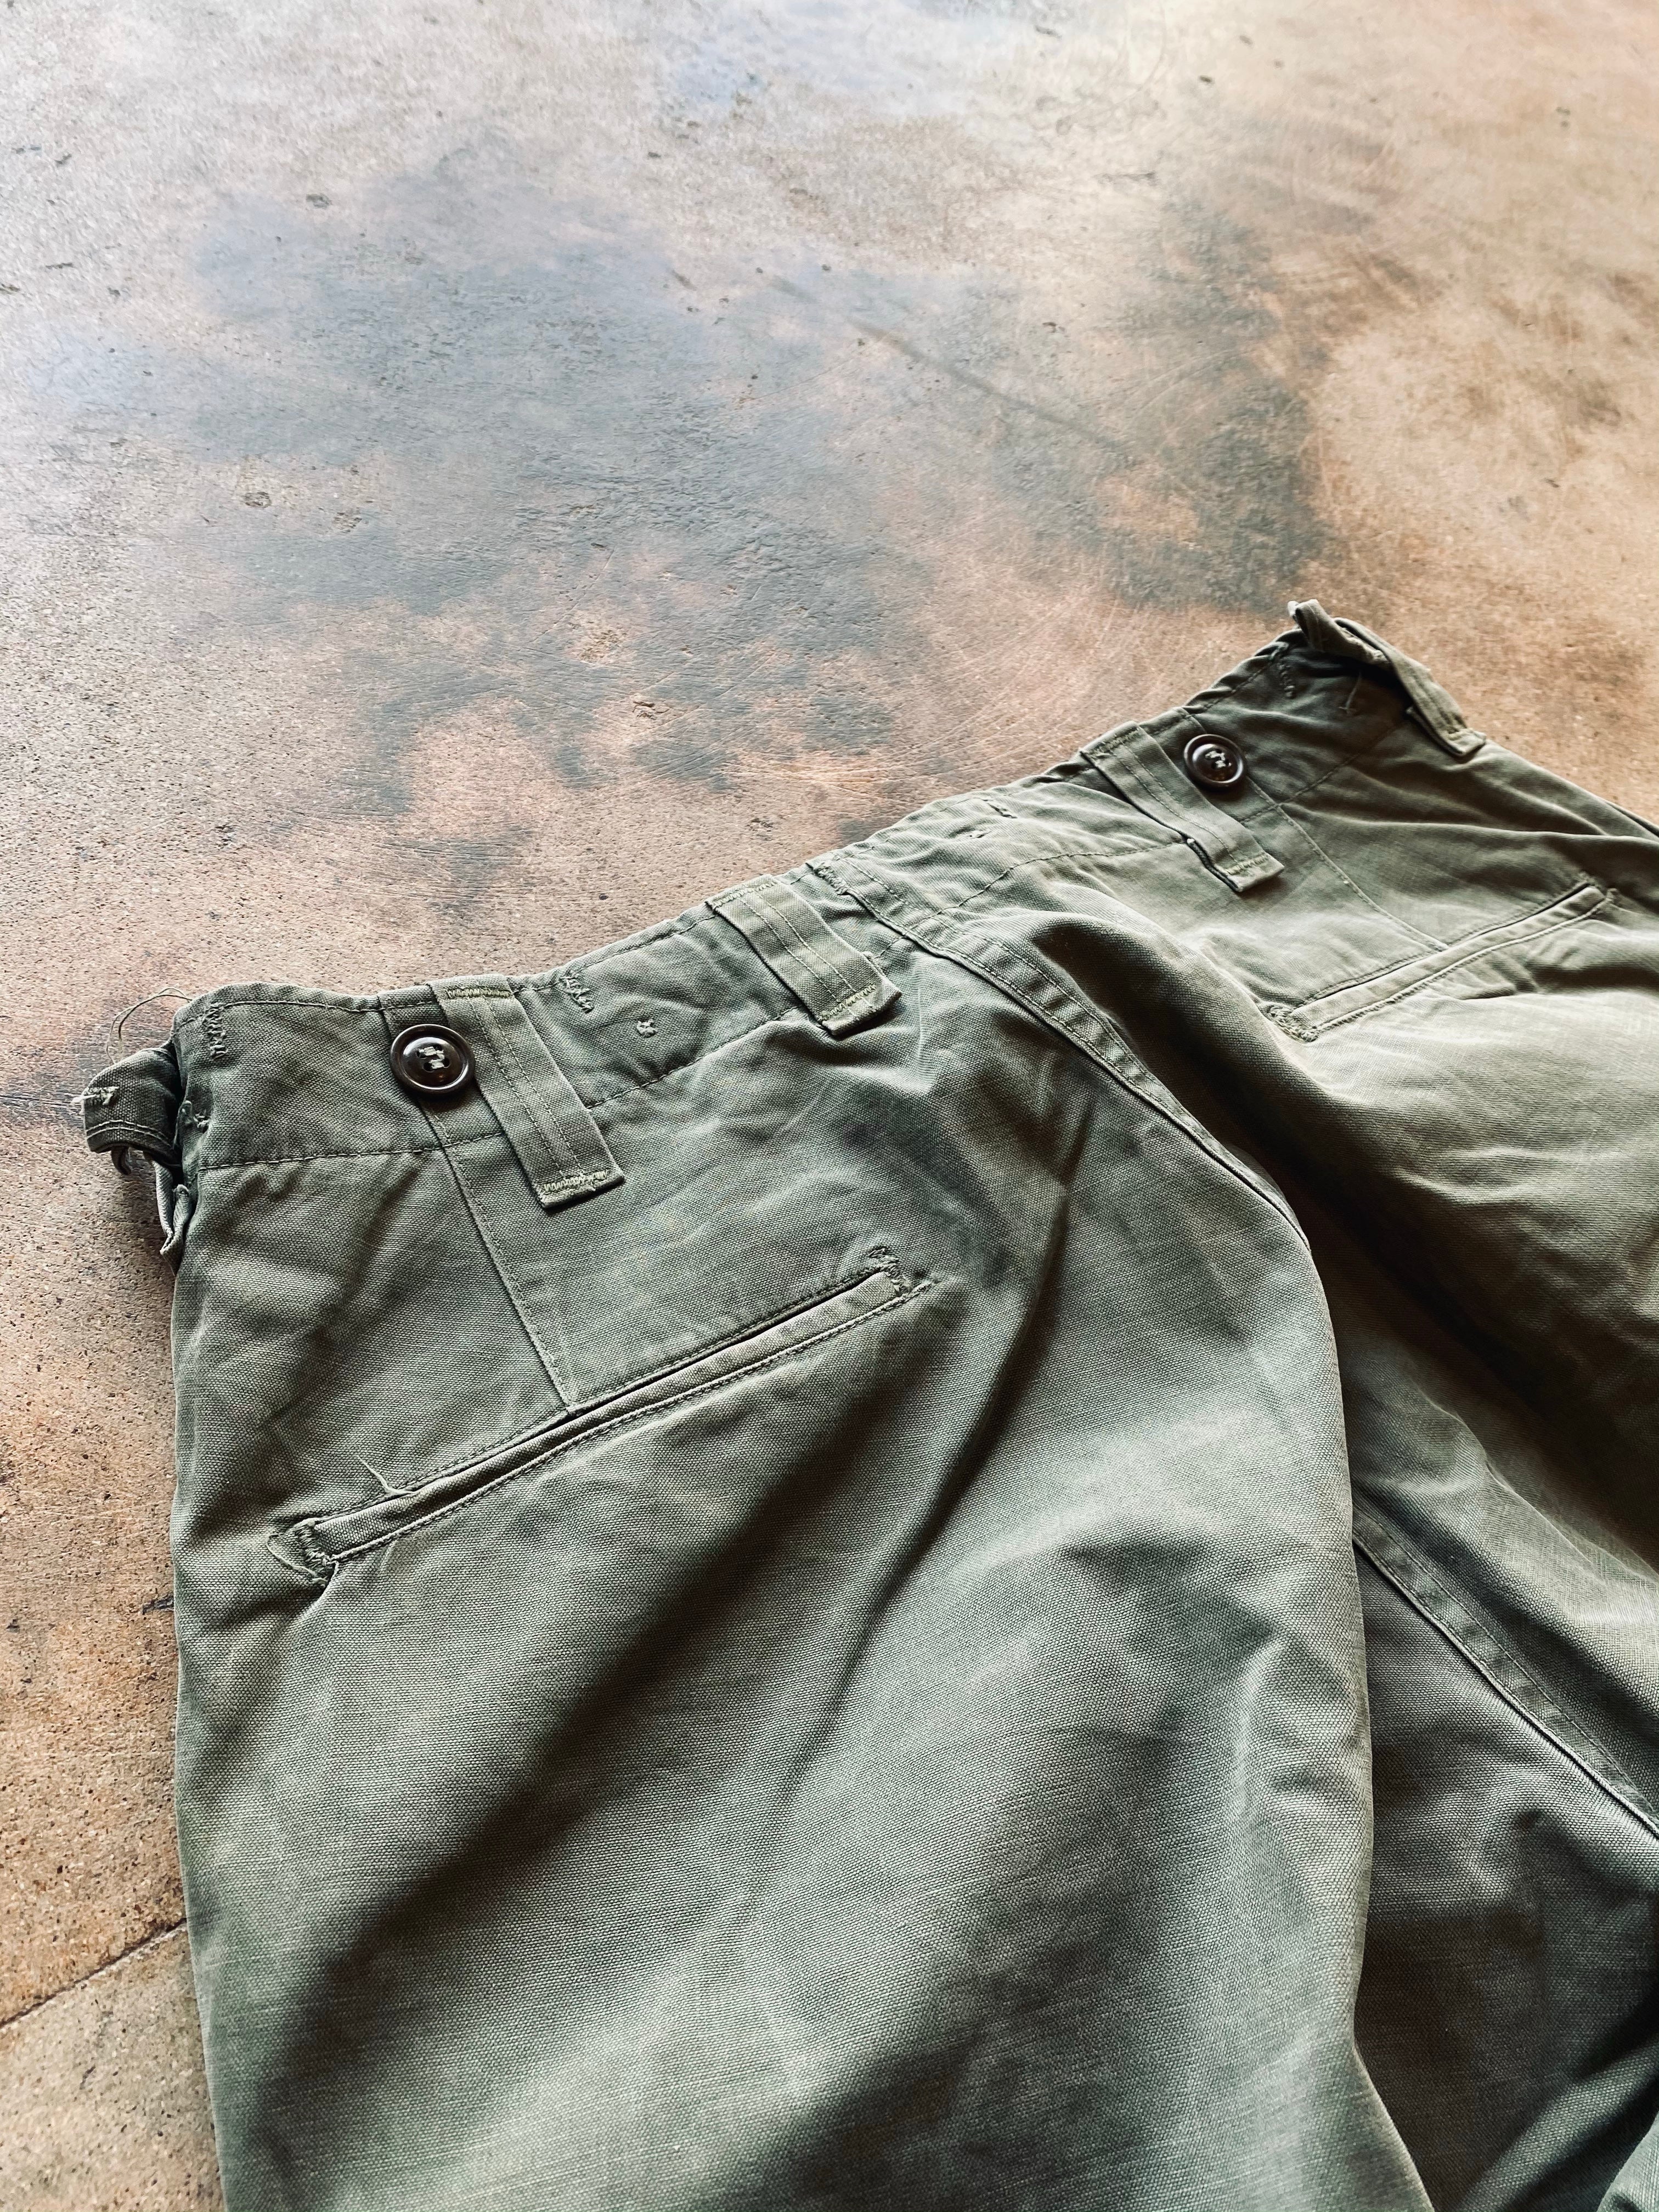 1940s-50s US Army Field Trouser